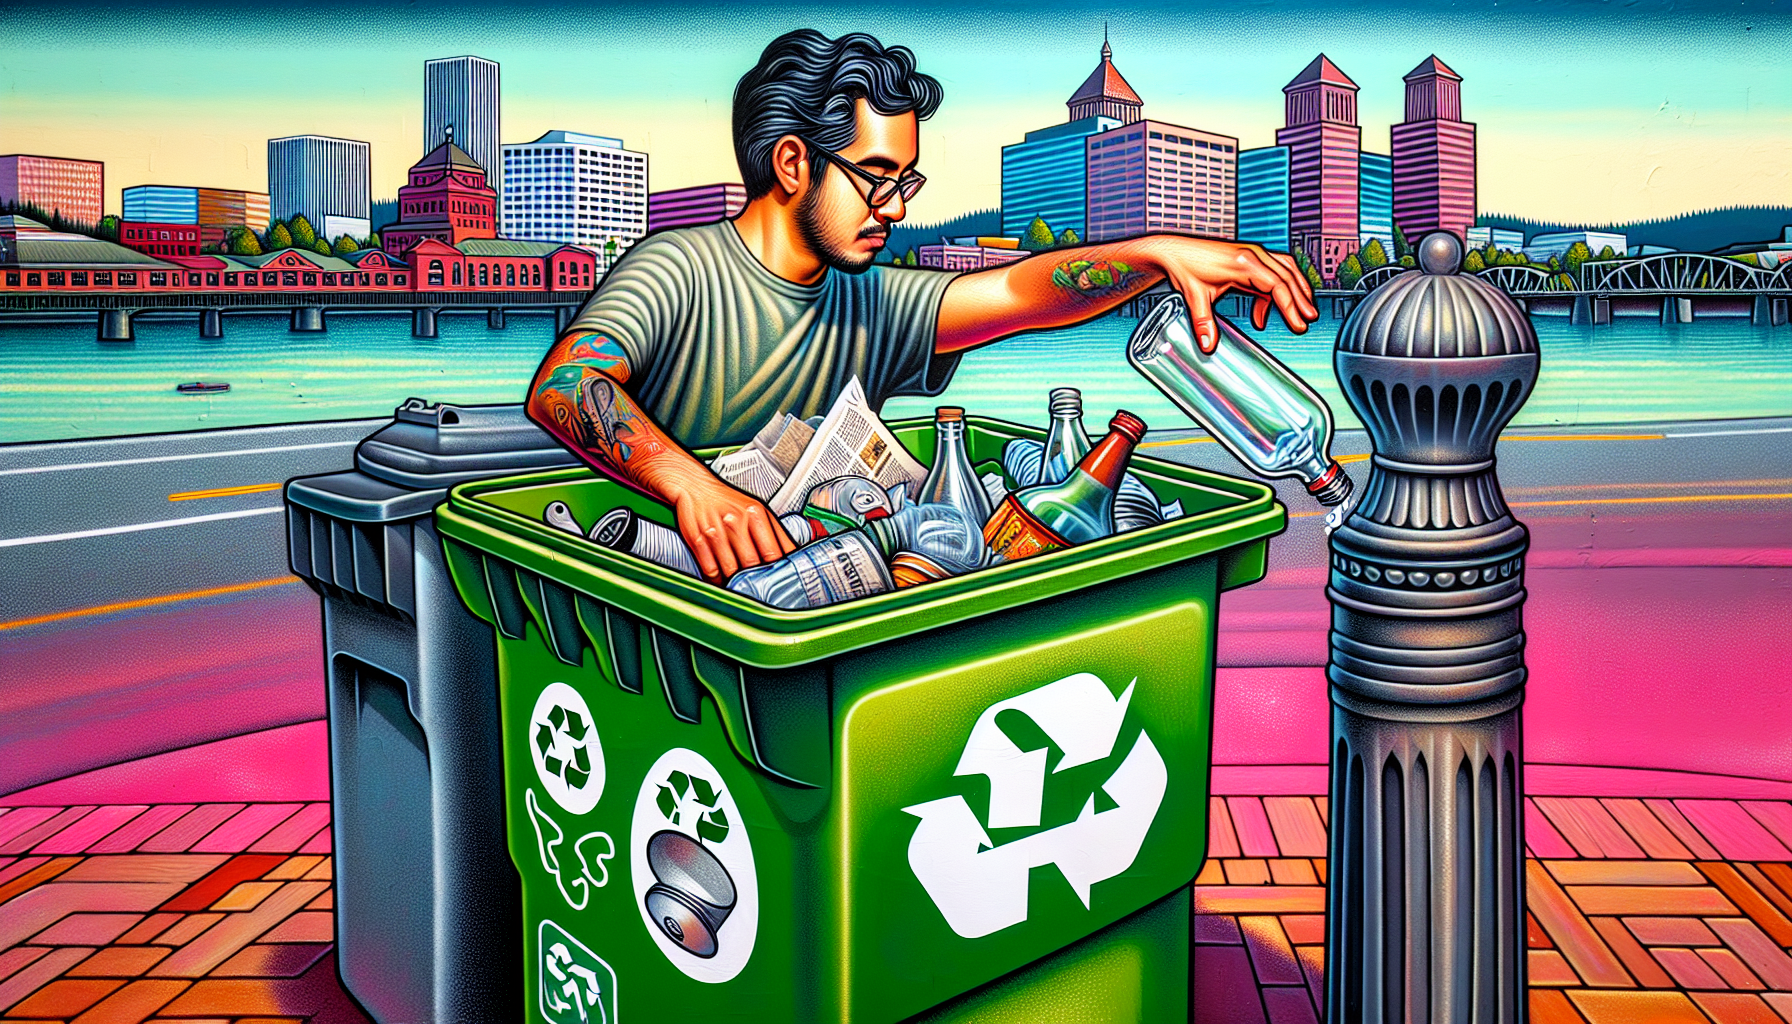 Illustration of a person putting items into a recycling bin in Portland